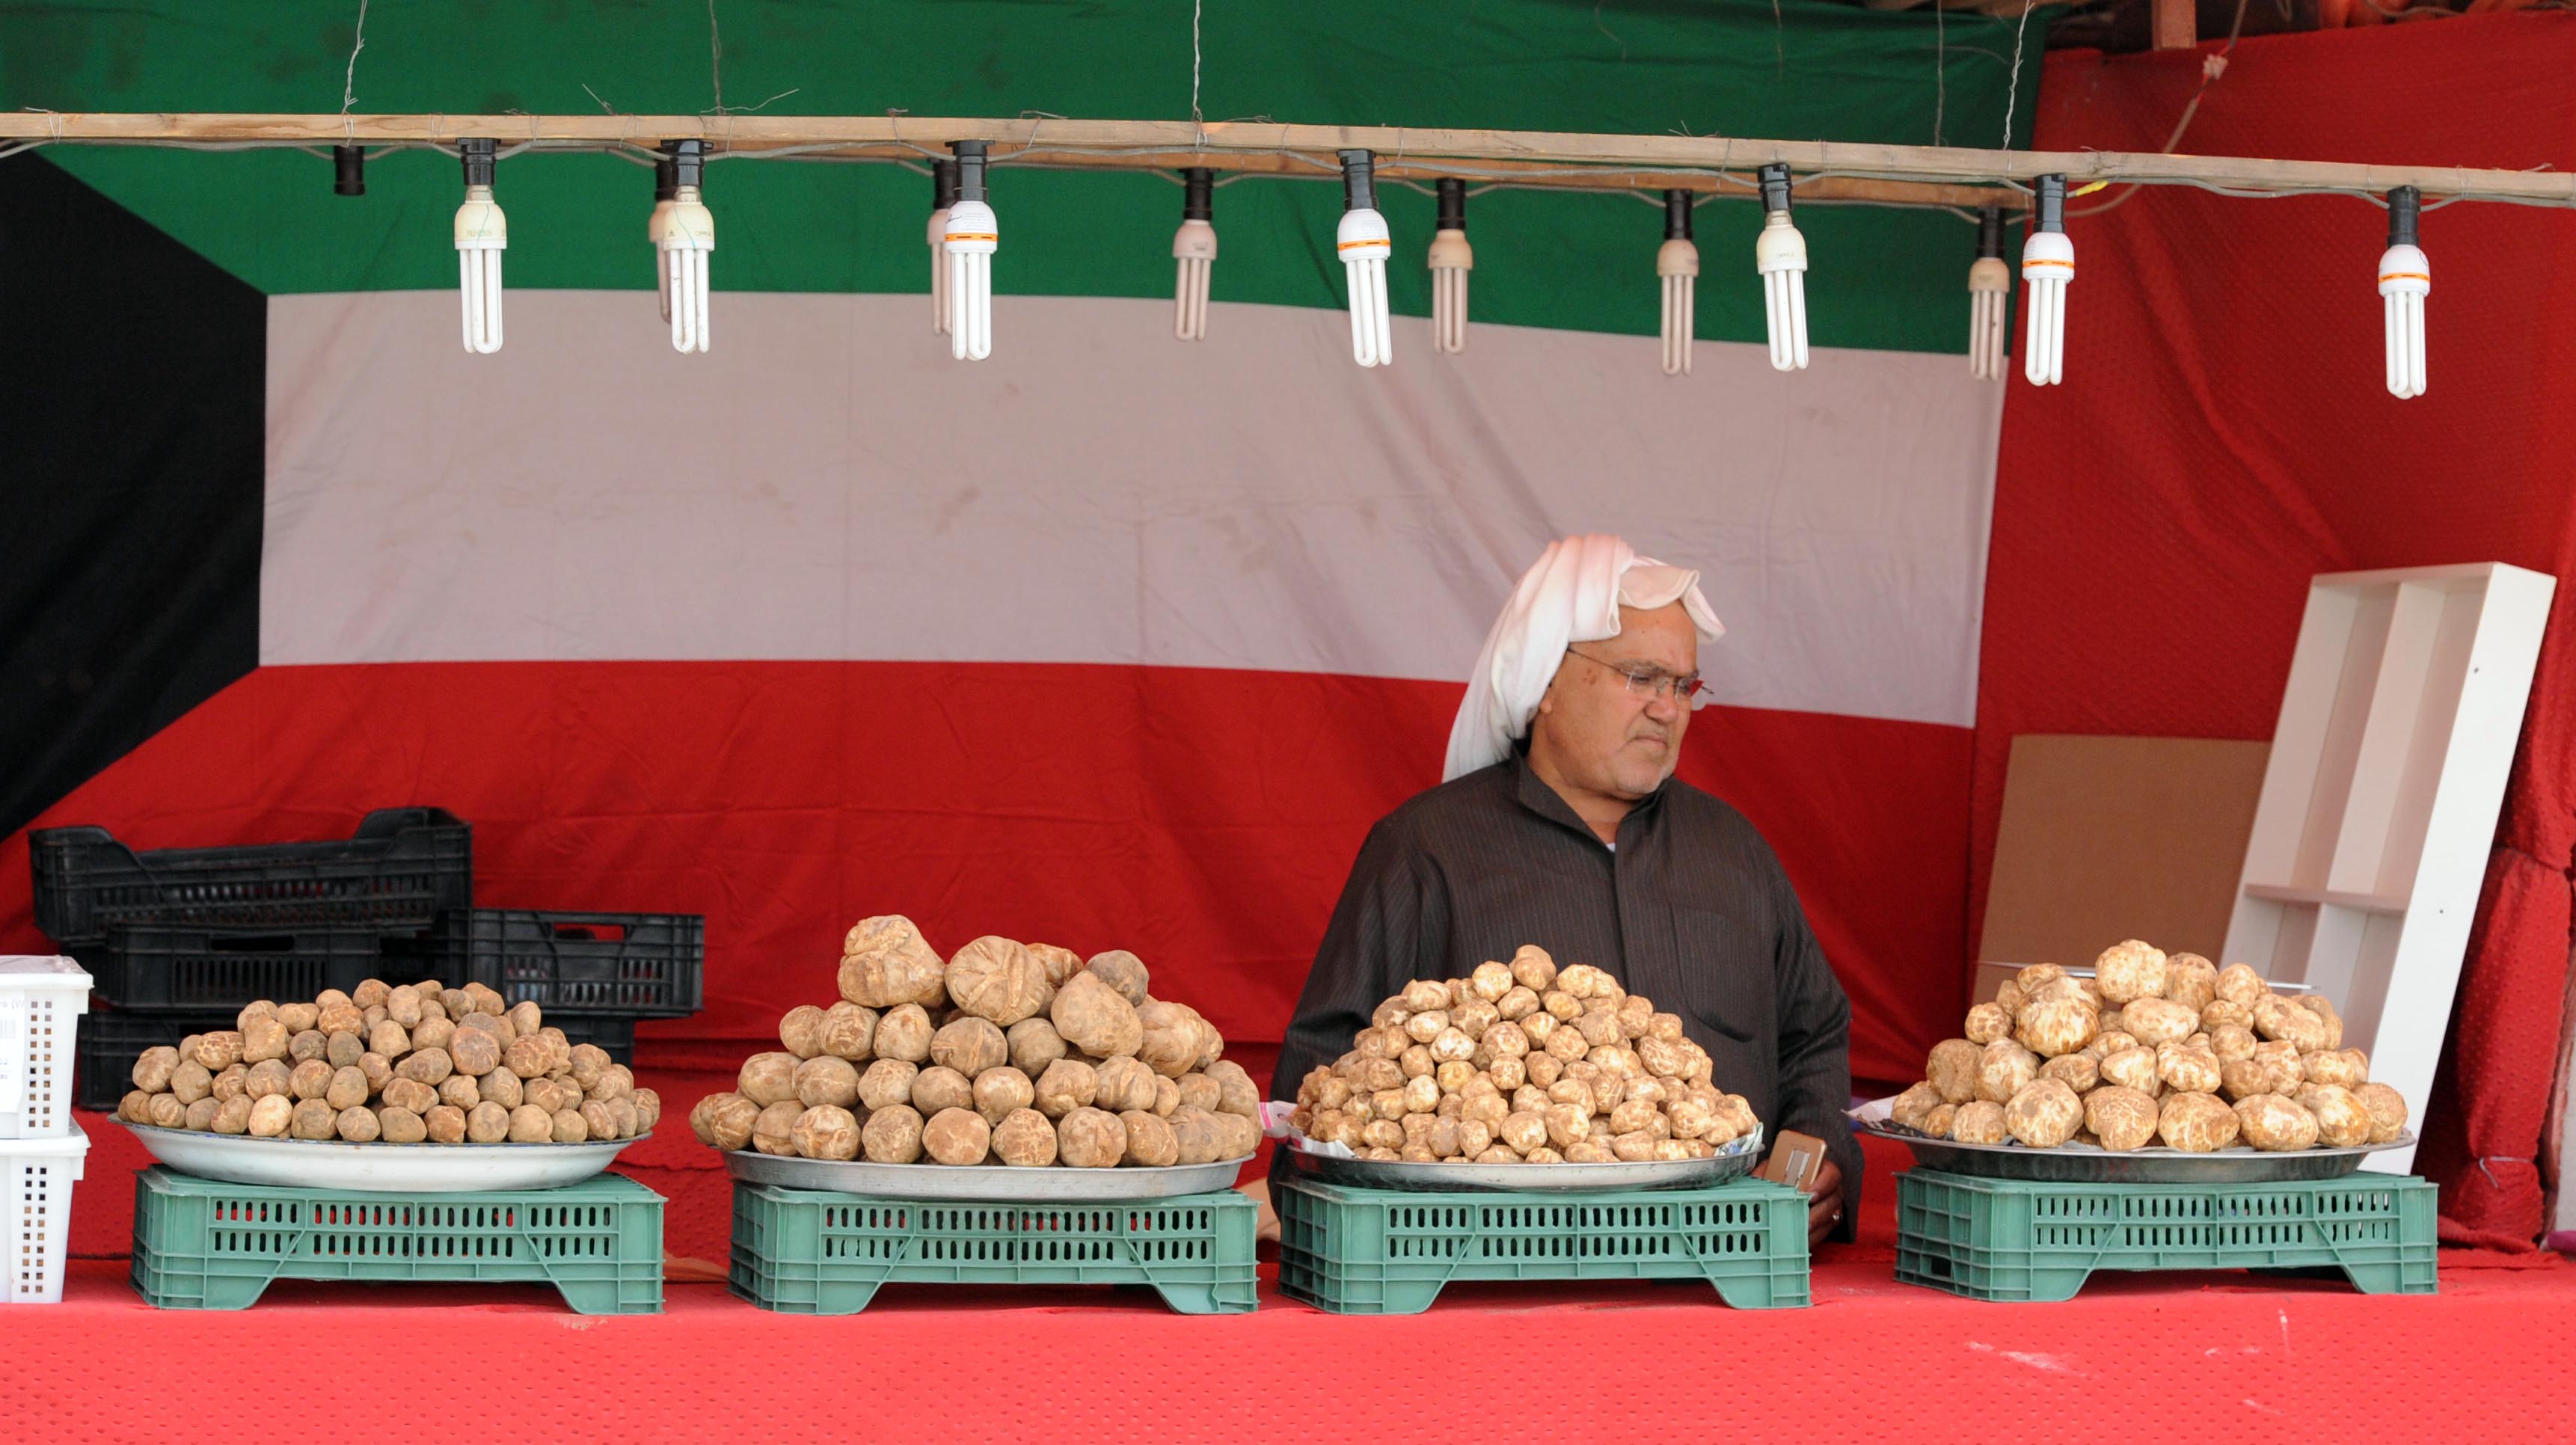 Due to the lack of rainfall in the region, the market lacked desert truffles